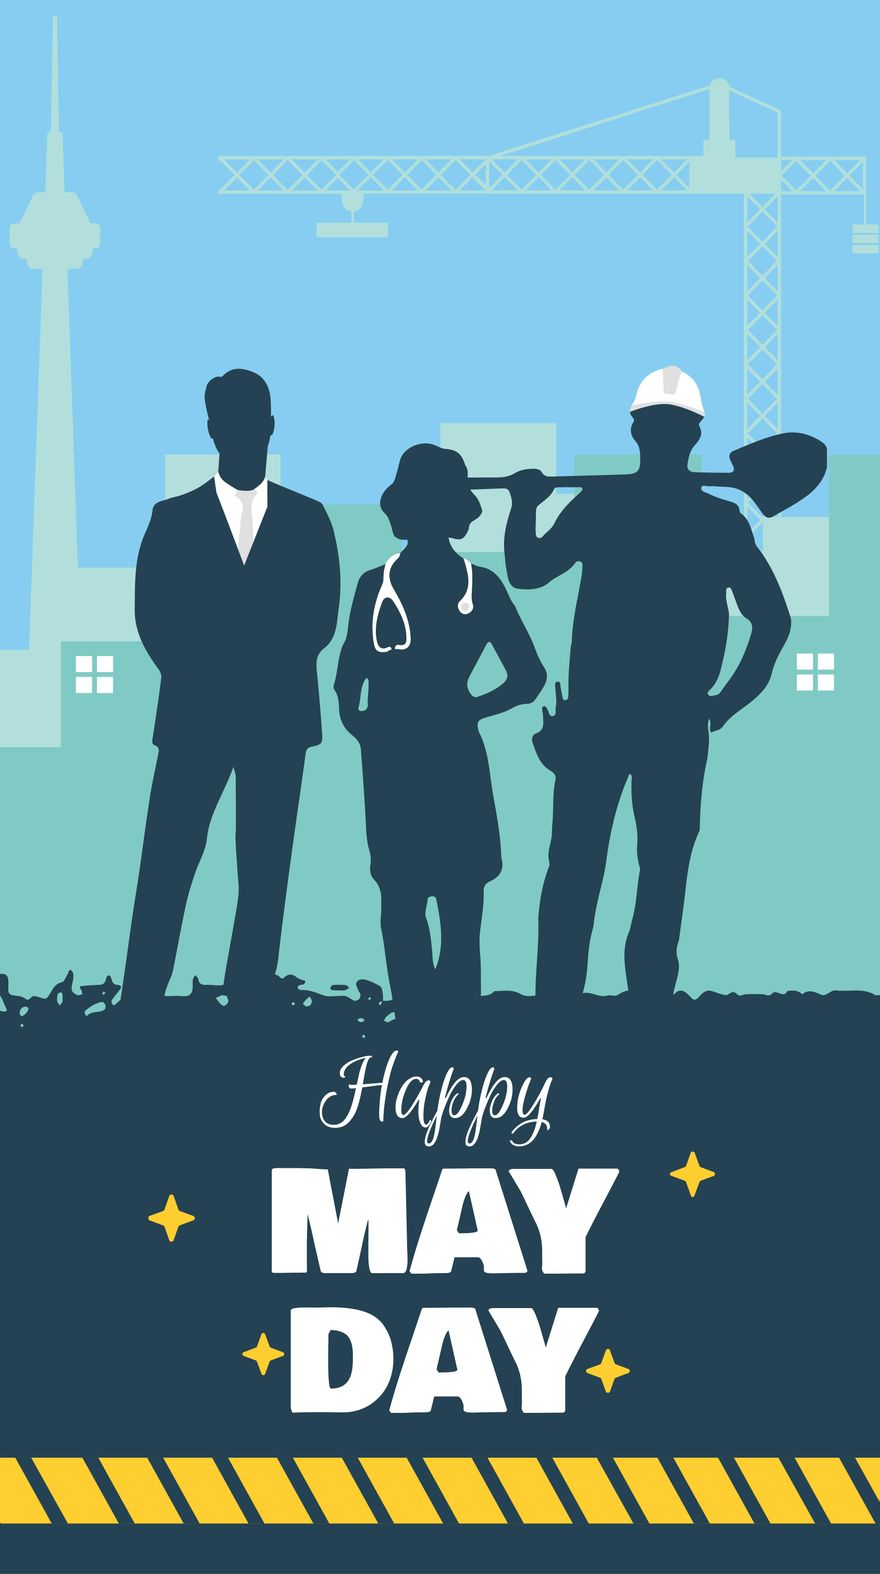 Free May Day iPhone Background in PDF, Illustrator, PSD, EPS, SVG, JPG, PNG